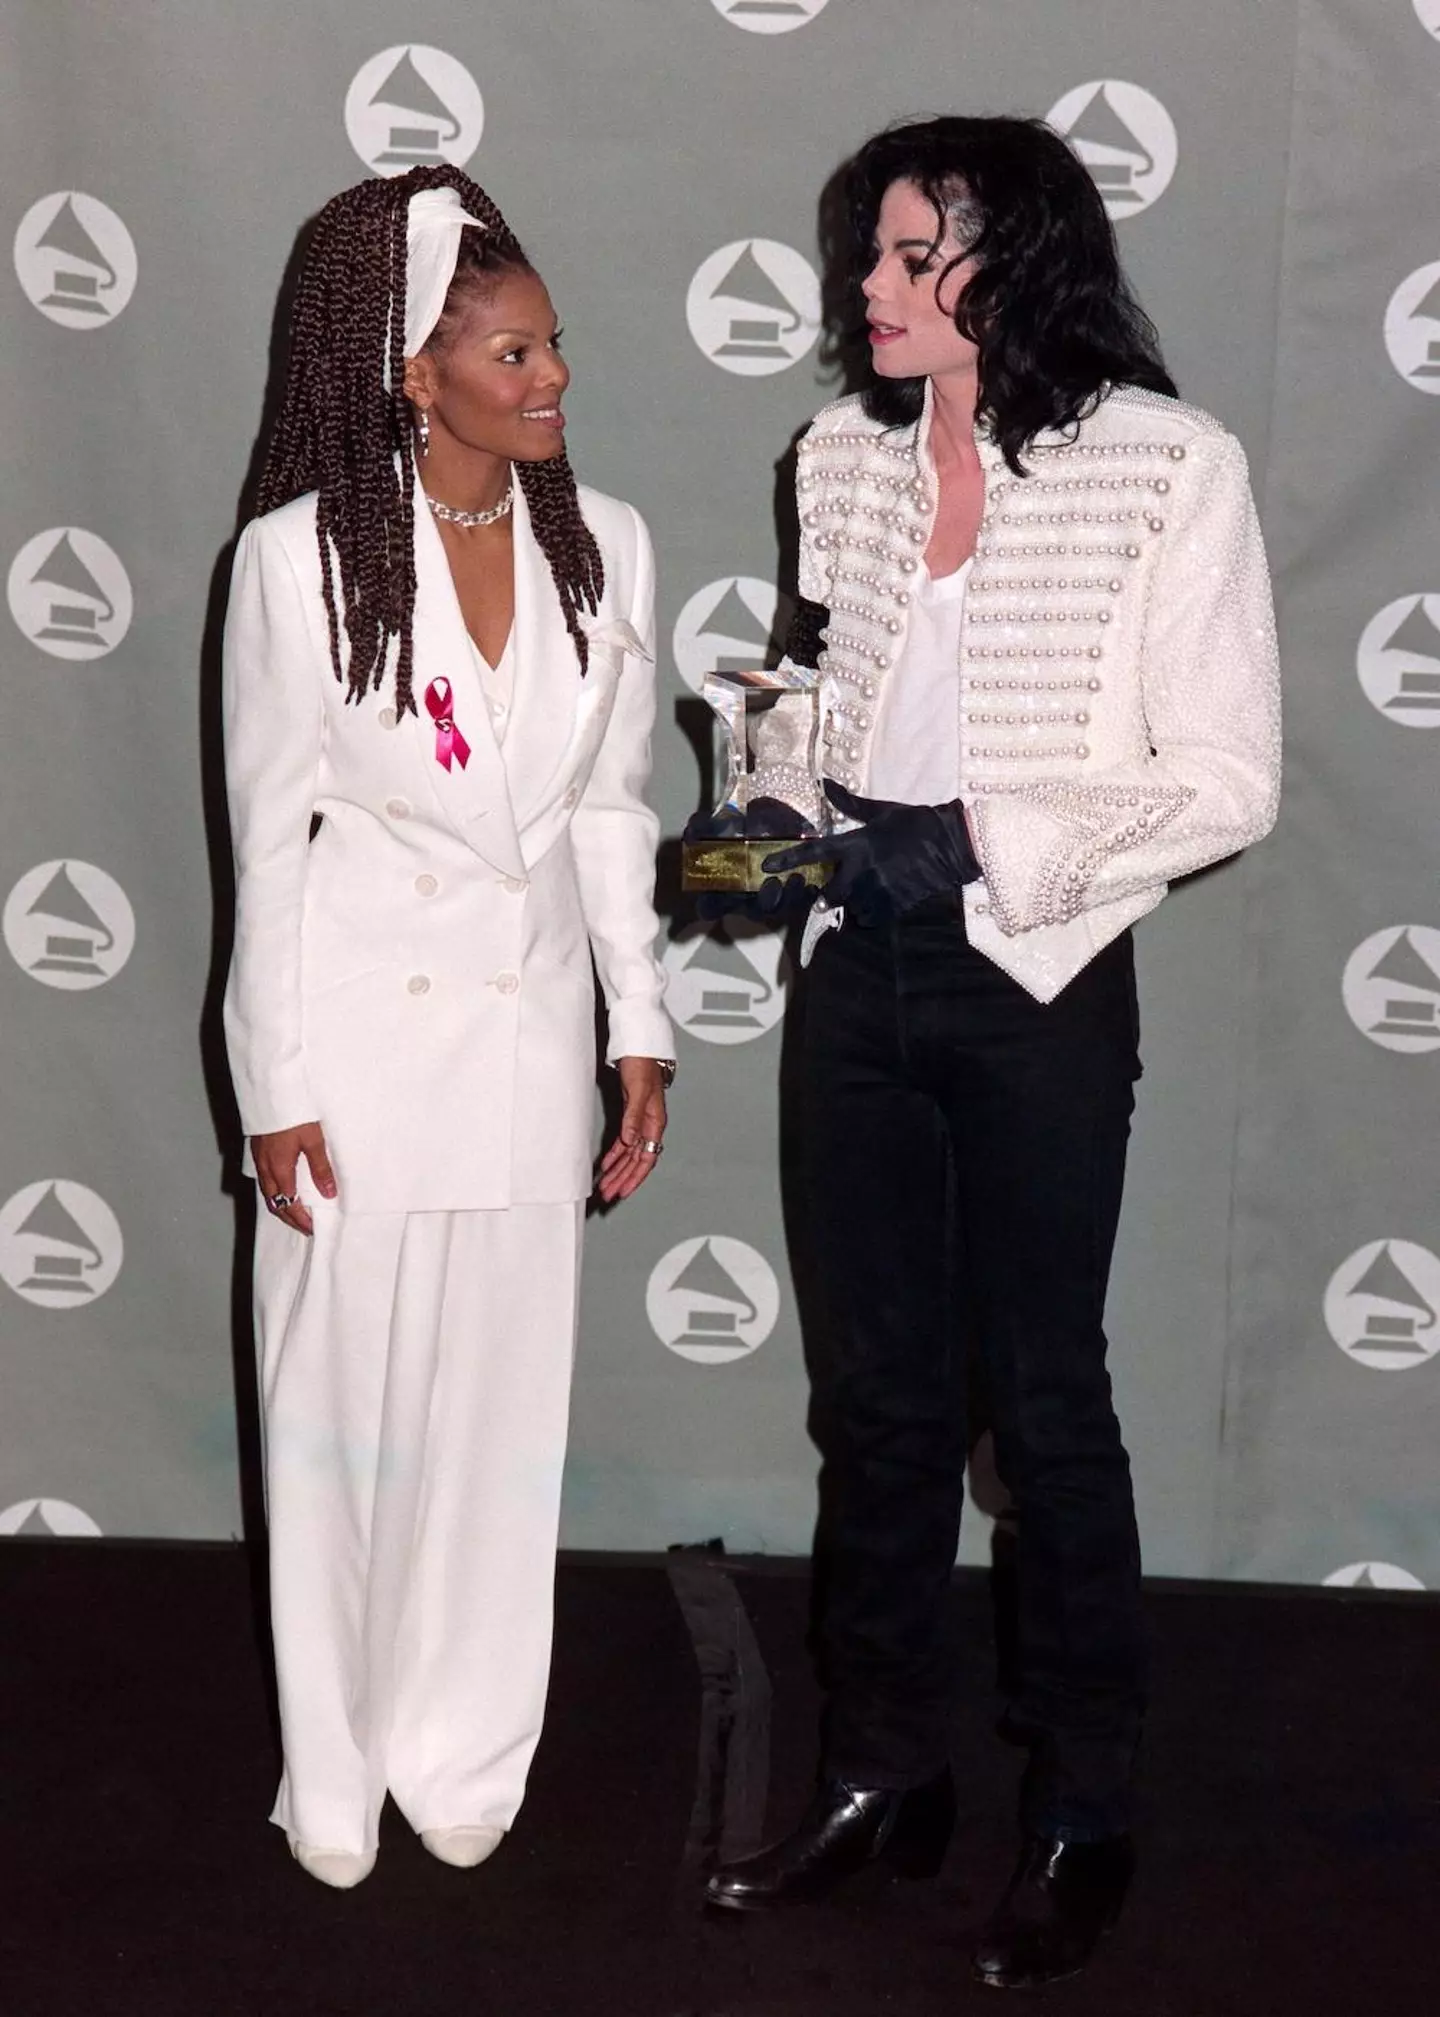 Michael claimed that he and his sibling Janet Jackson were scared of their father.